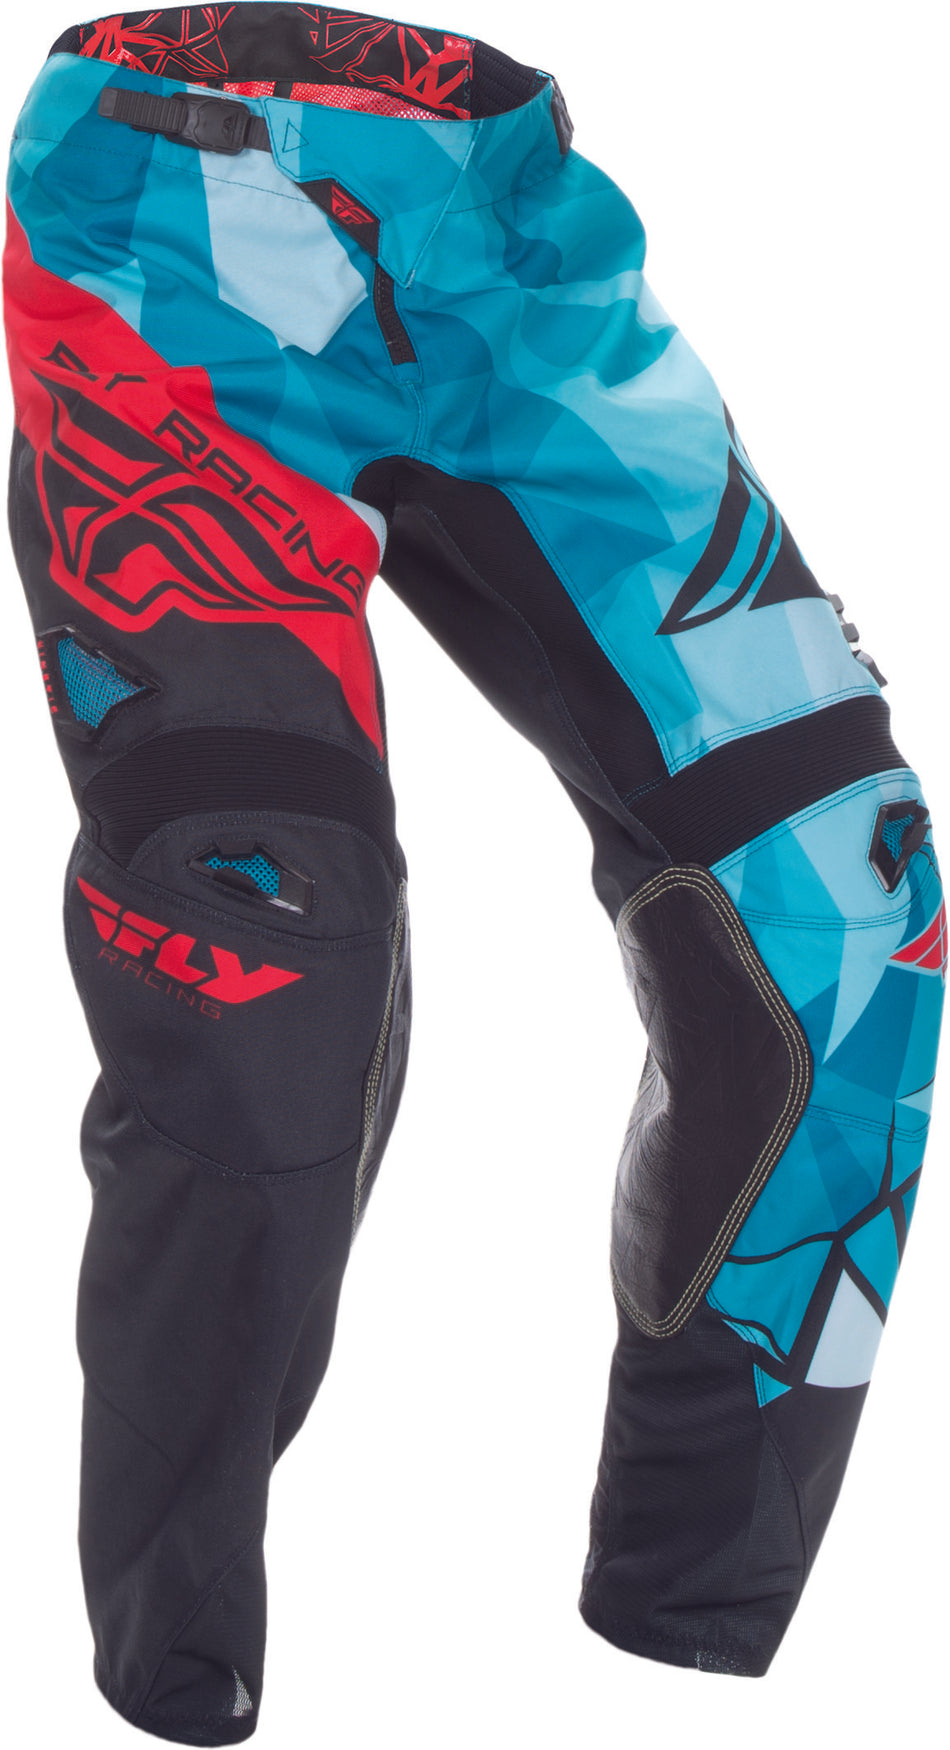 FLY RACING Kinetic Crux Pant Teal/Red Sz 34 370-53934